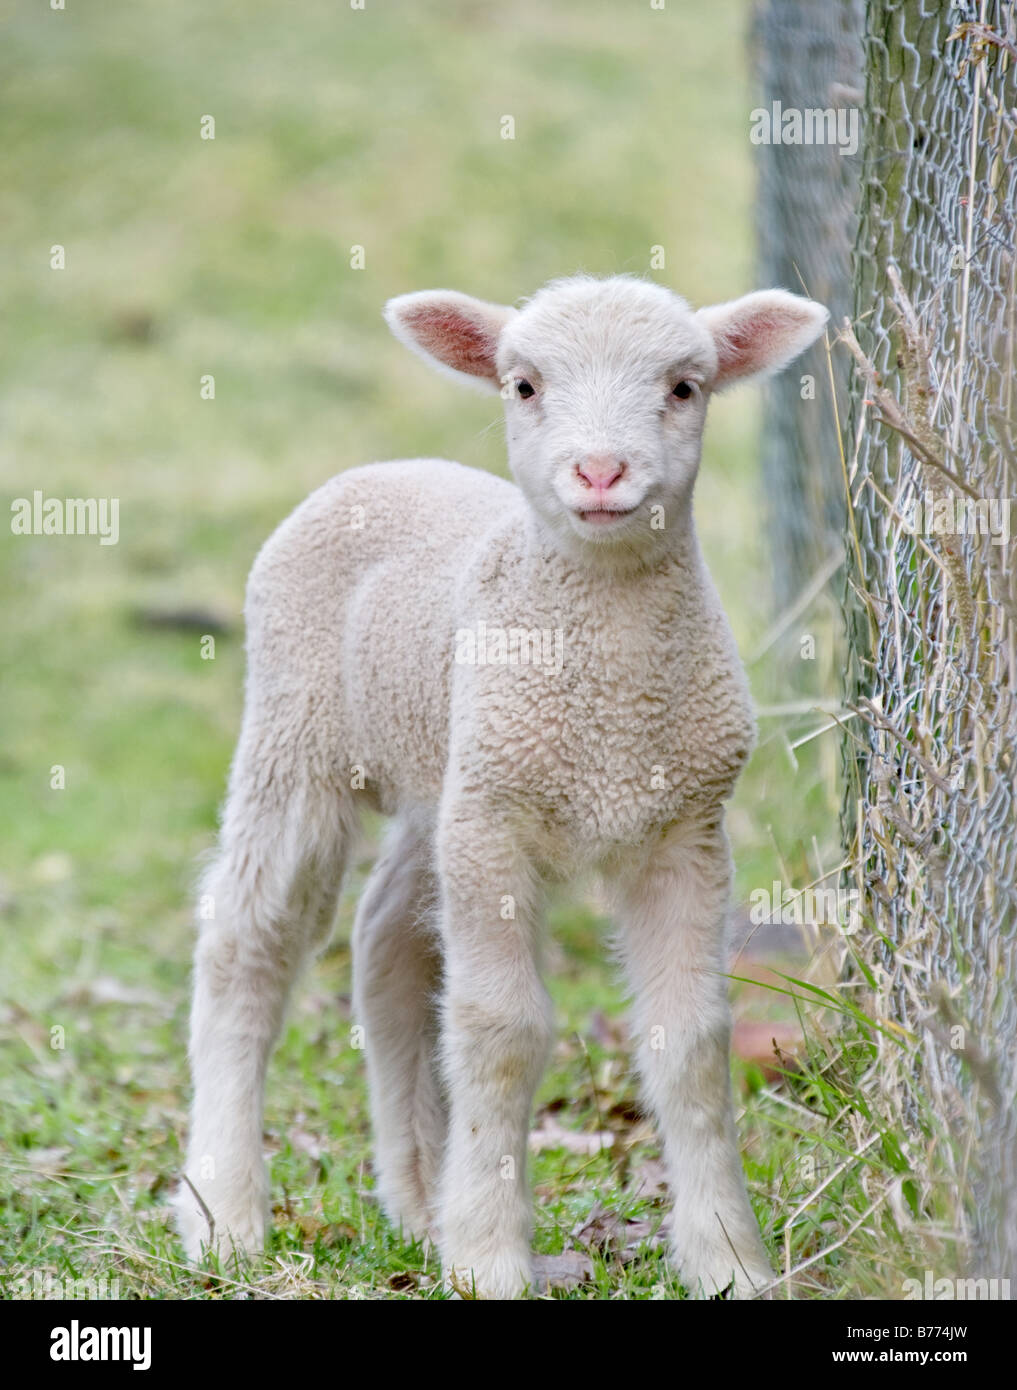 great image of a cute baby lamb on the farm Stock Photo